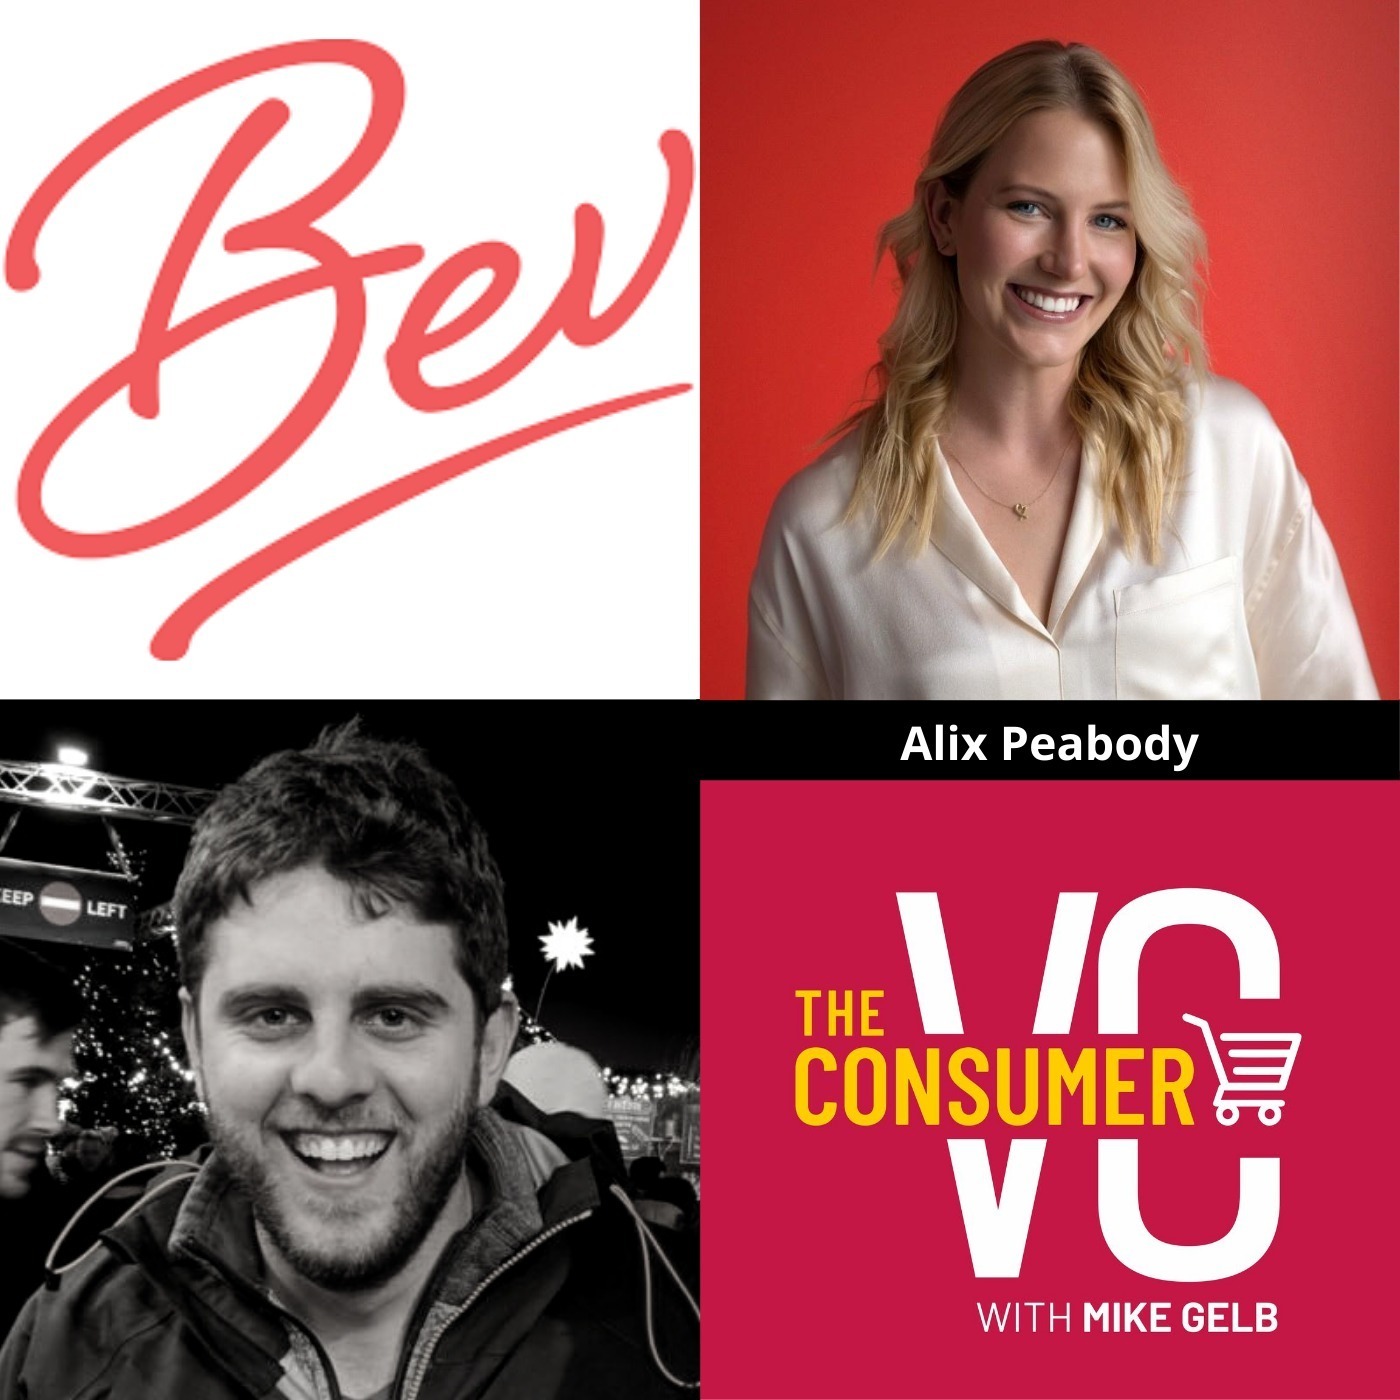 Alix Peabody (Bev) - From Producing Events to Founding a Wine Company, The Challenges When Raising Capital, and How She Thinks About Opportunities